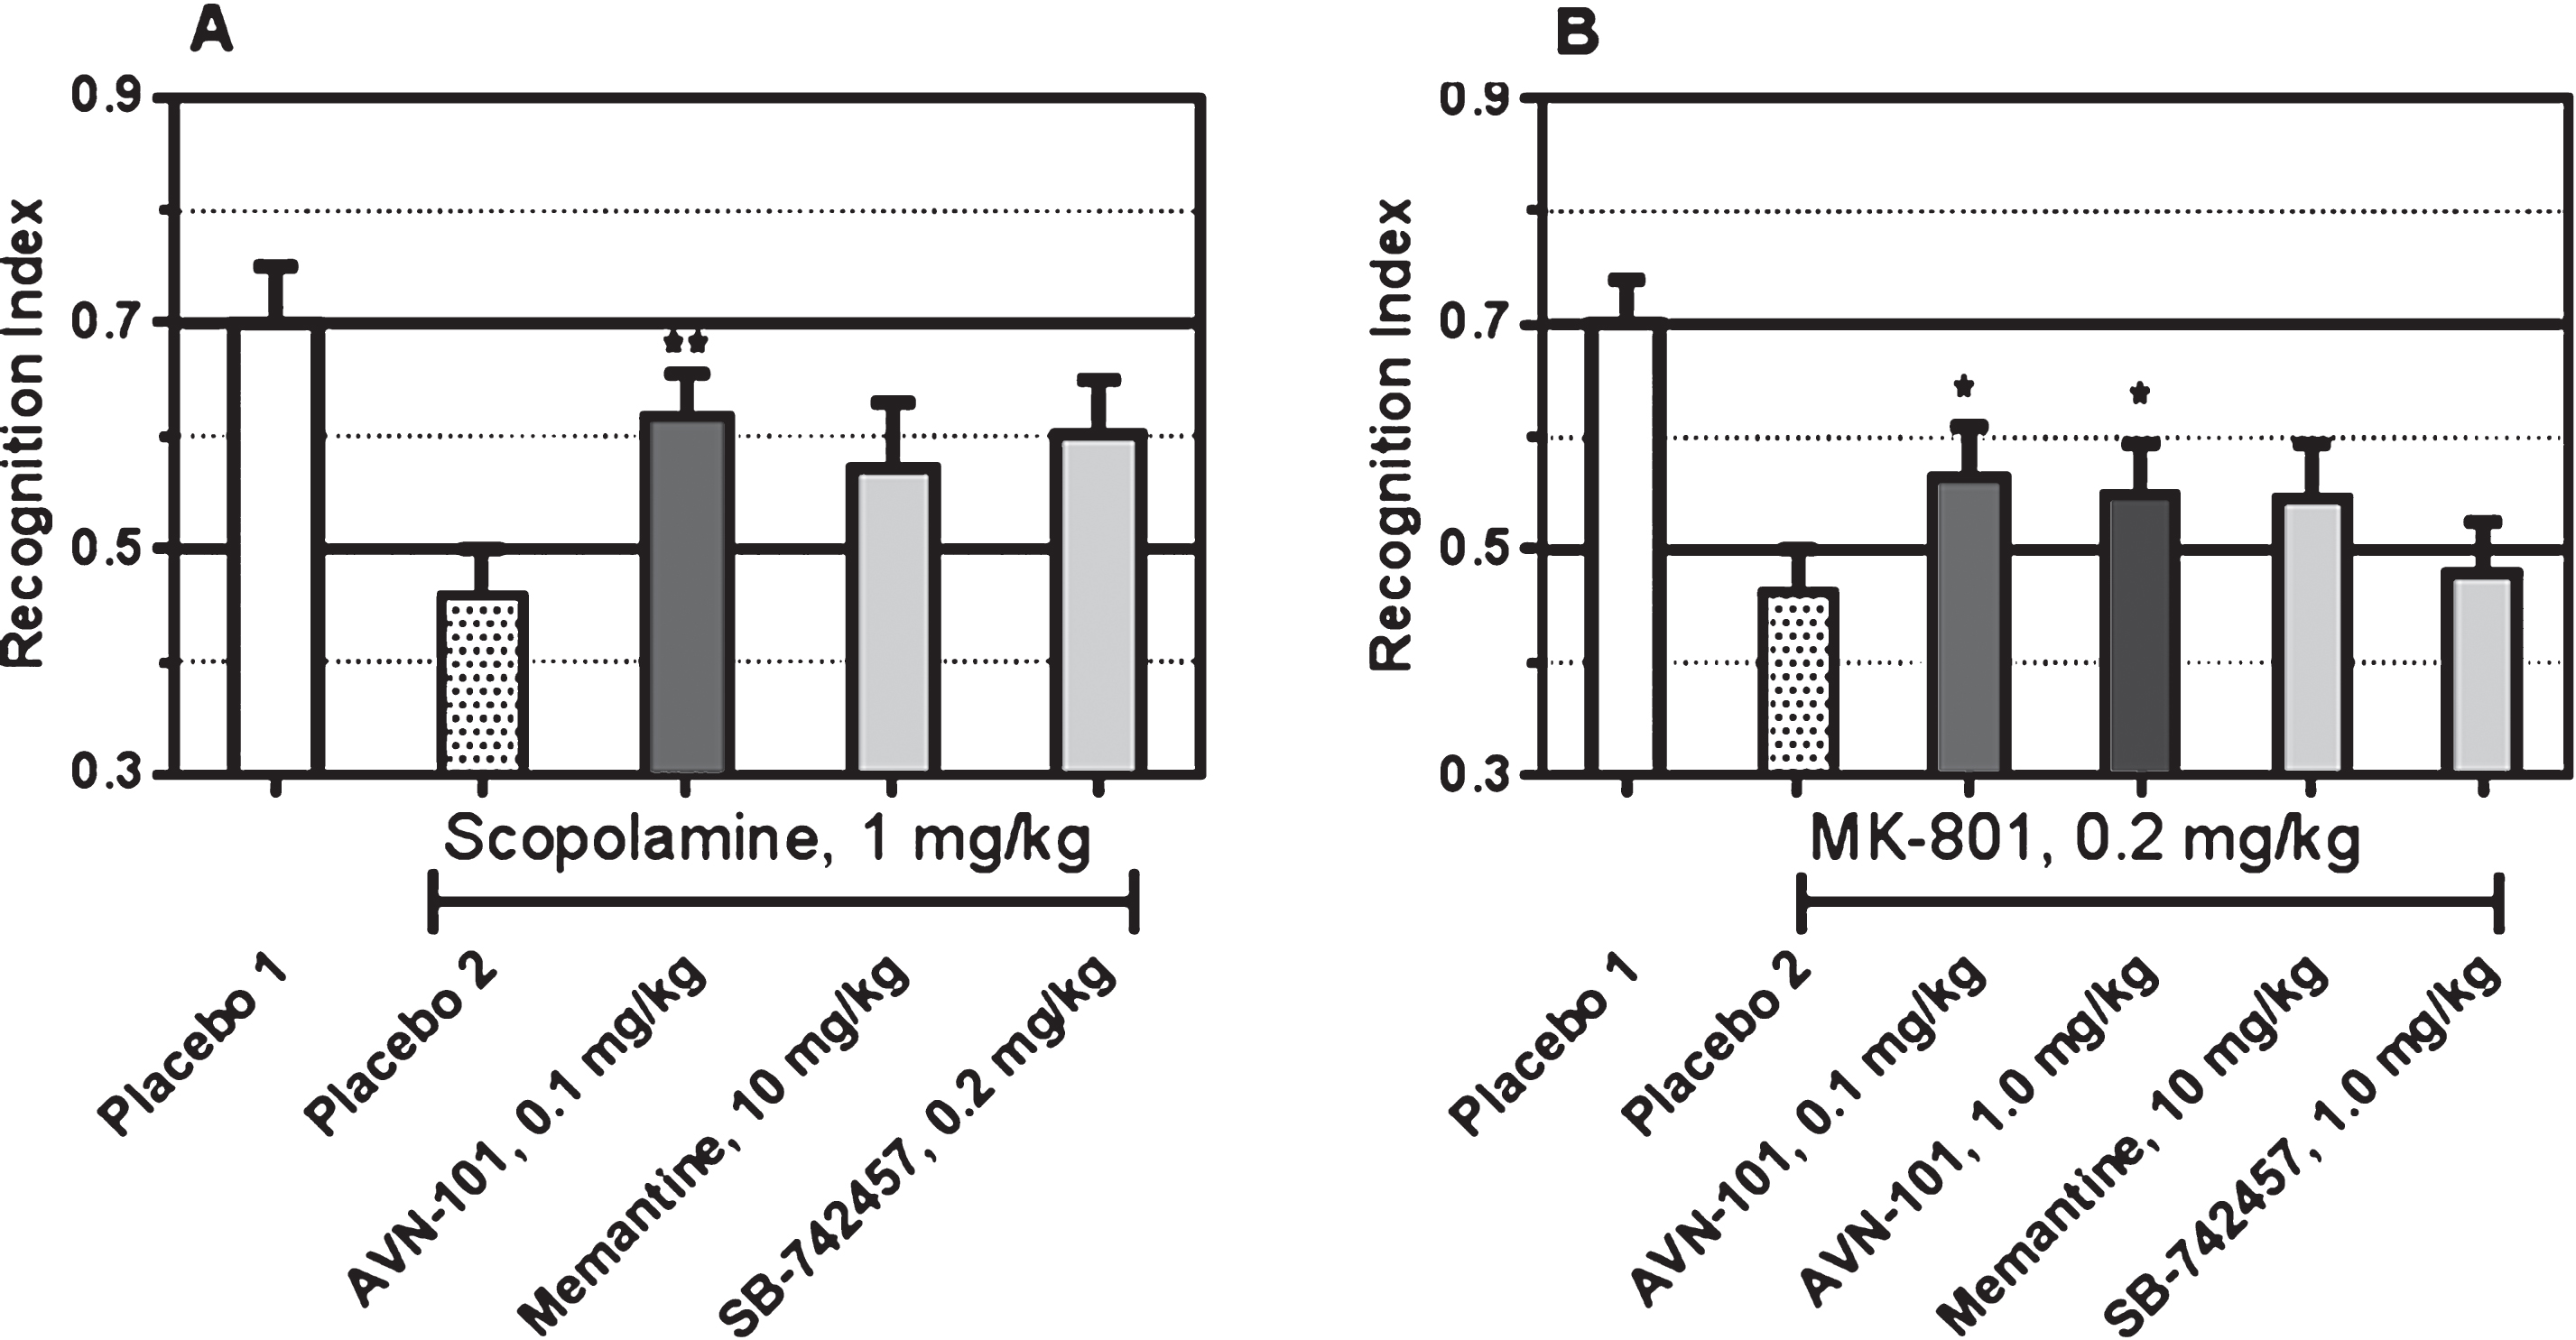 Effect of the AVN-101 and positive control drugs, memantine and SB-742457, on novel object recognition index in male BALB/c mice (mean ± SE) upon scopolamine (A) or NK-801-induced amnesia (B). Difference from group administered with scopolamine (Placebo 2): *p < 0.05; **p < 0.01 (Student test).